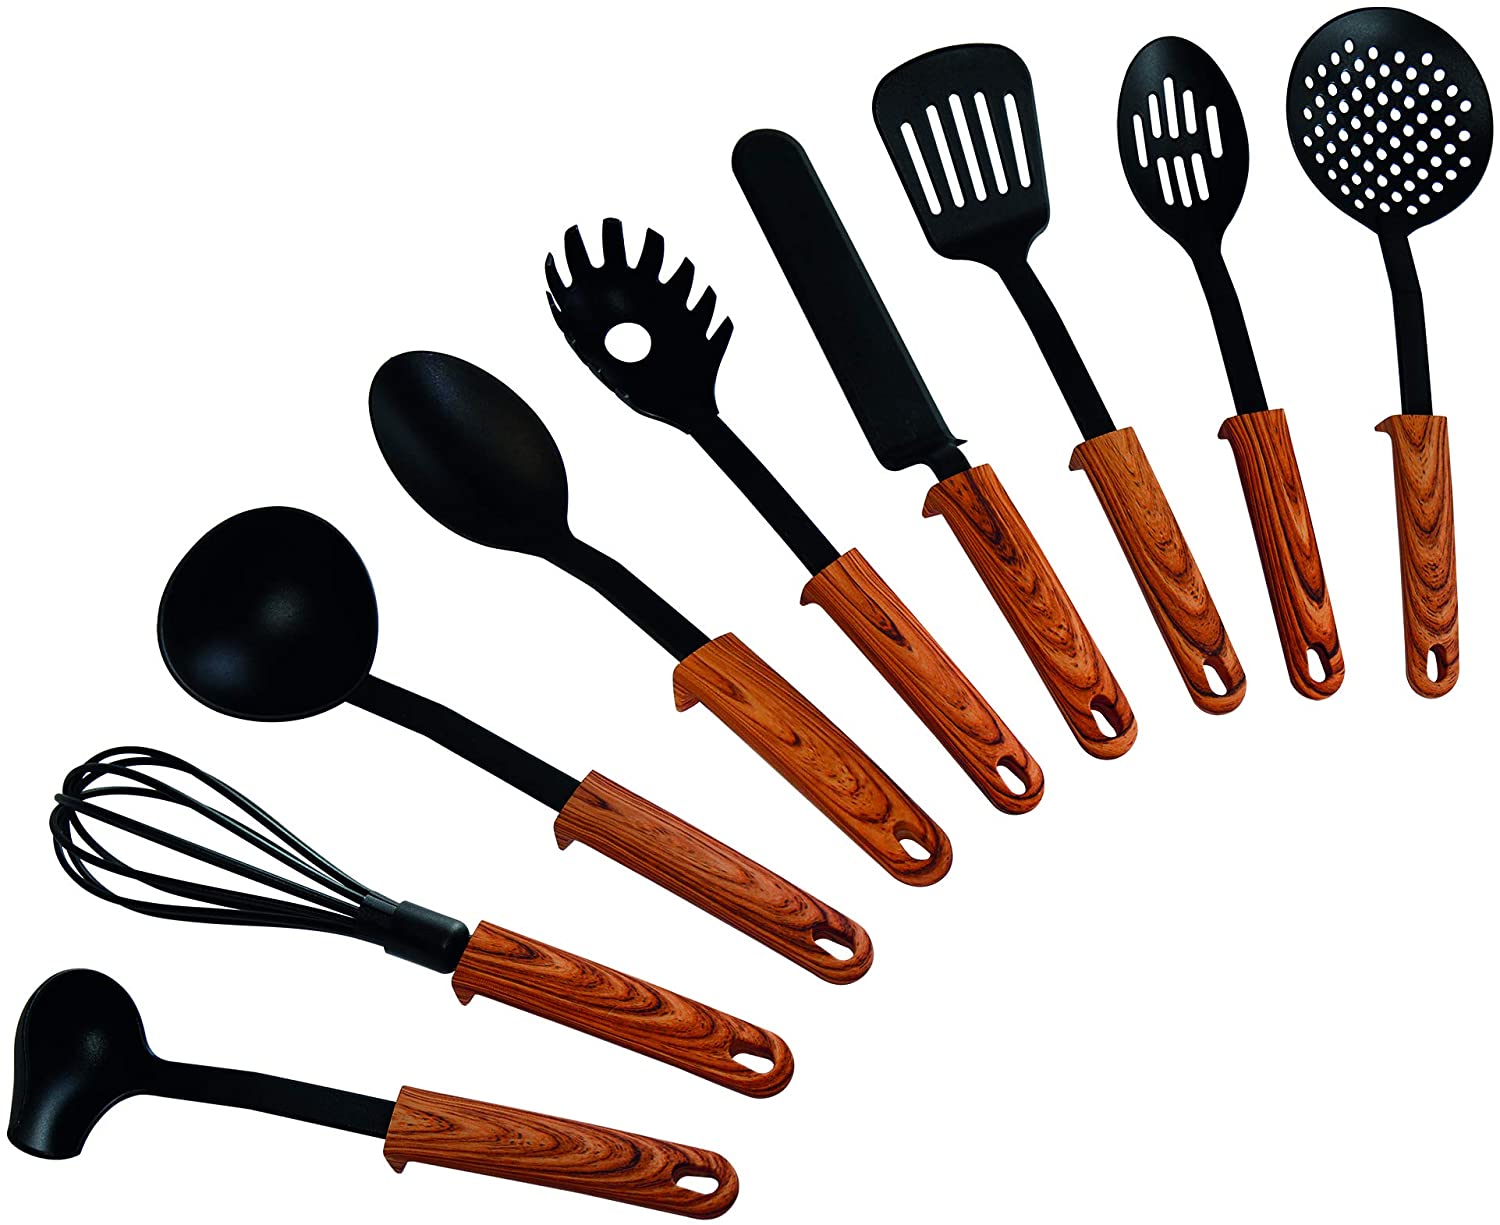 STONELINE Back to Nature 9-Piece Kitchen Utensil Set, Wood Look Handles, Plastic, with Practical Support, Suitable for Non-Stick Cookware, Kitchen Utensils Set